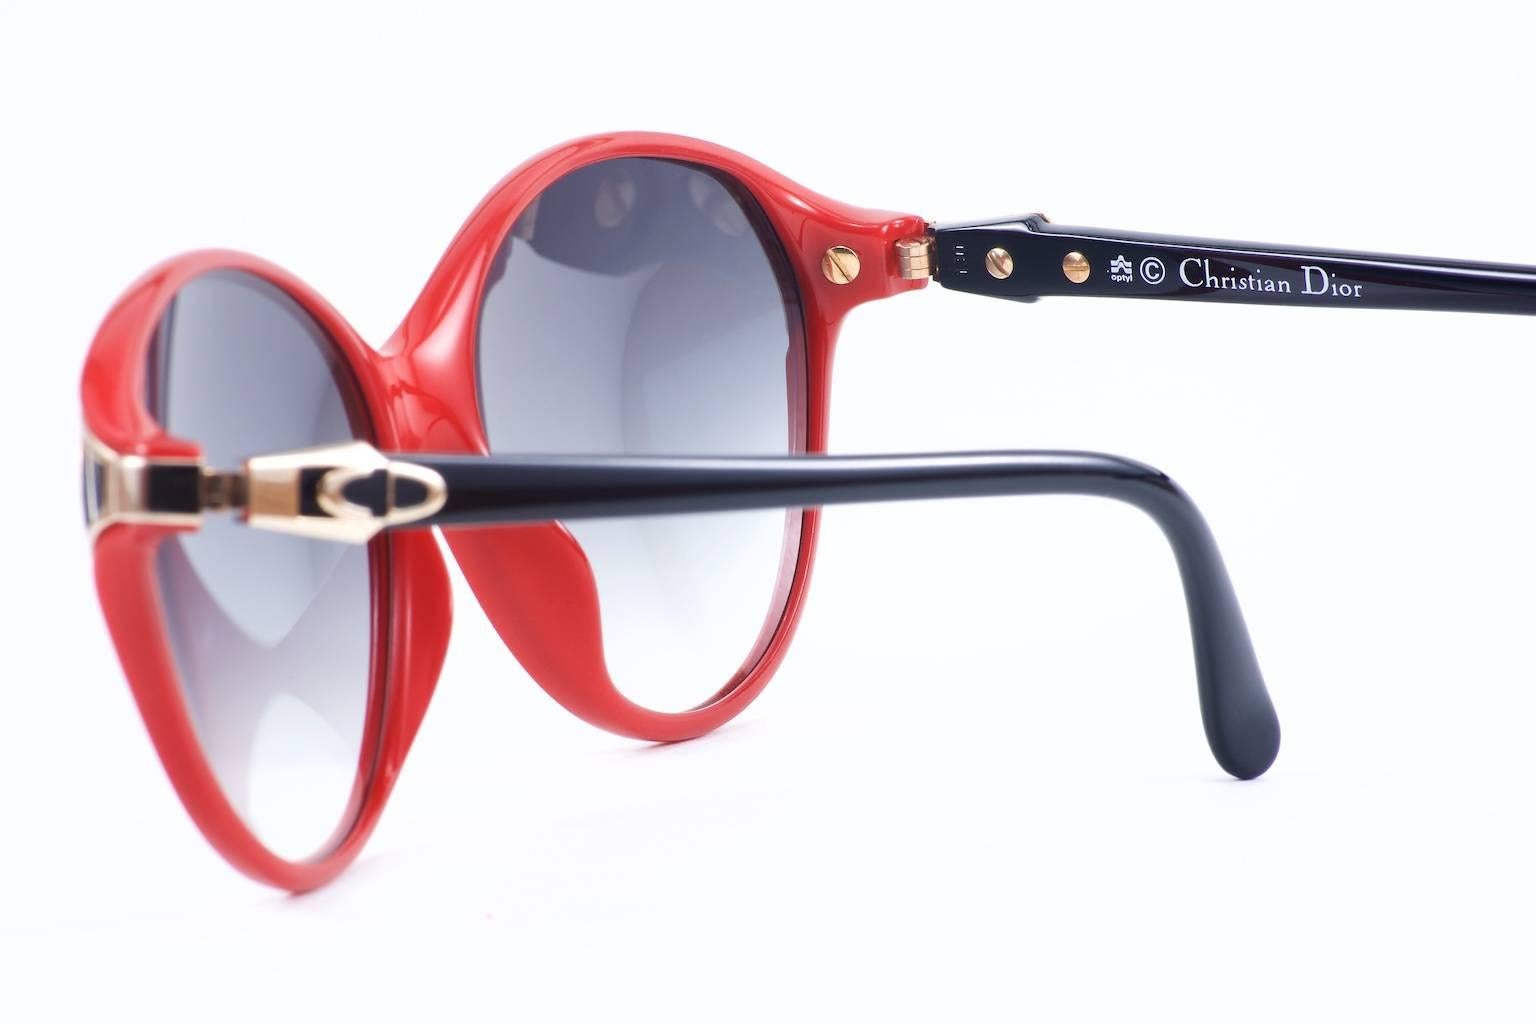 Purple Hotel de Ville's Christian Dior Wire-Topped Sunglasses, Red-Black/Gold accents For Sale